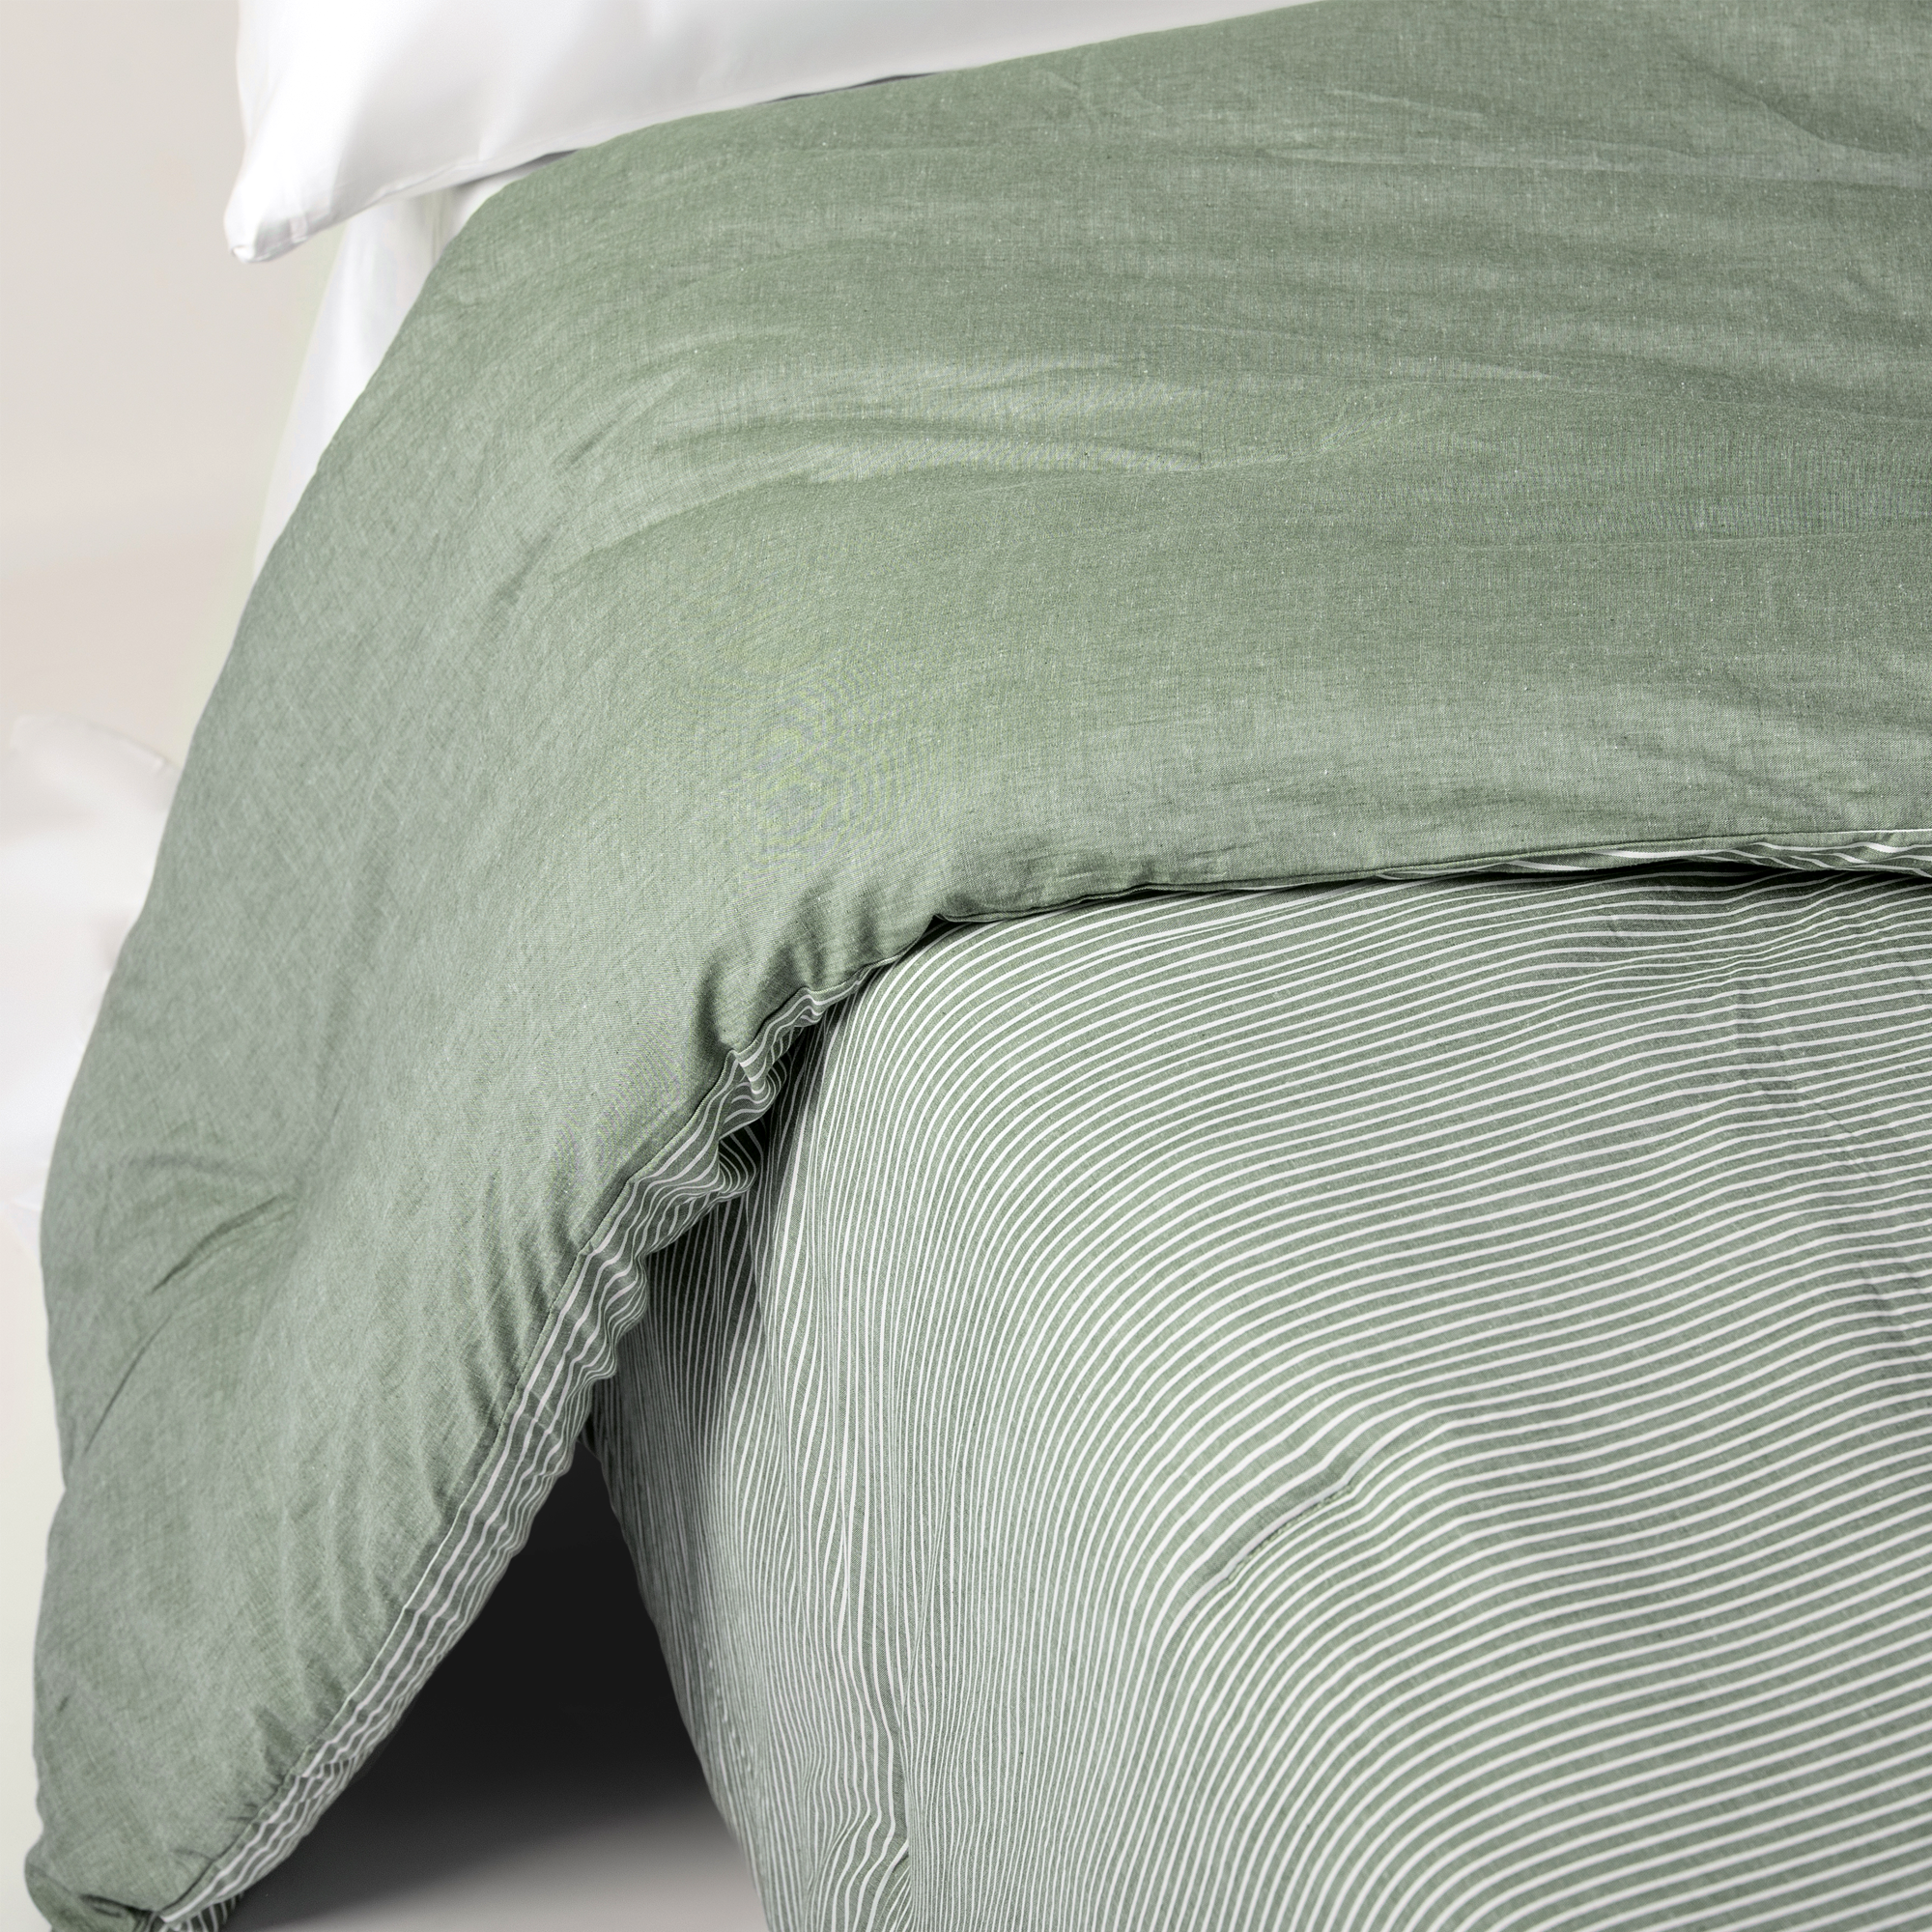 The Linen Company Bedding Standard Olive Striped Comforter